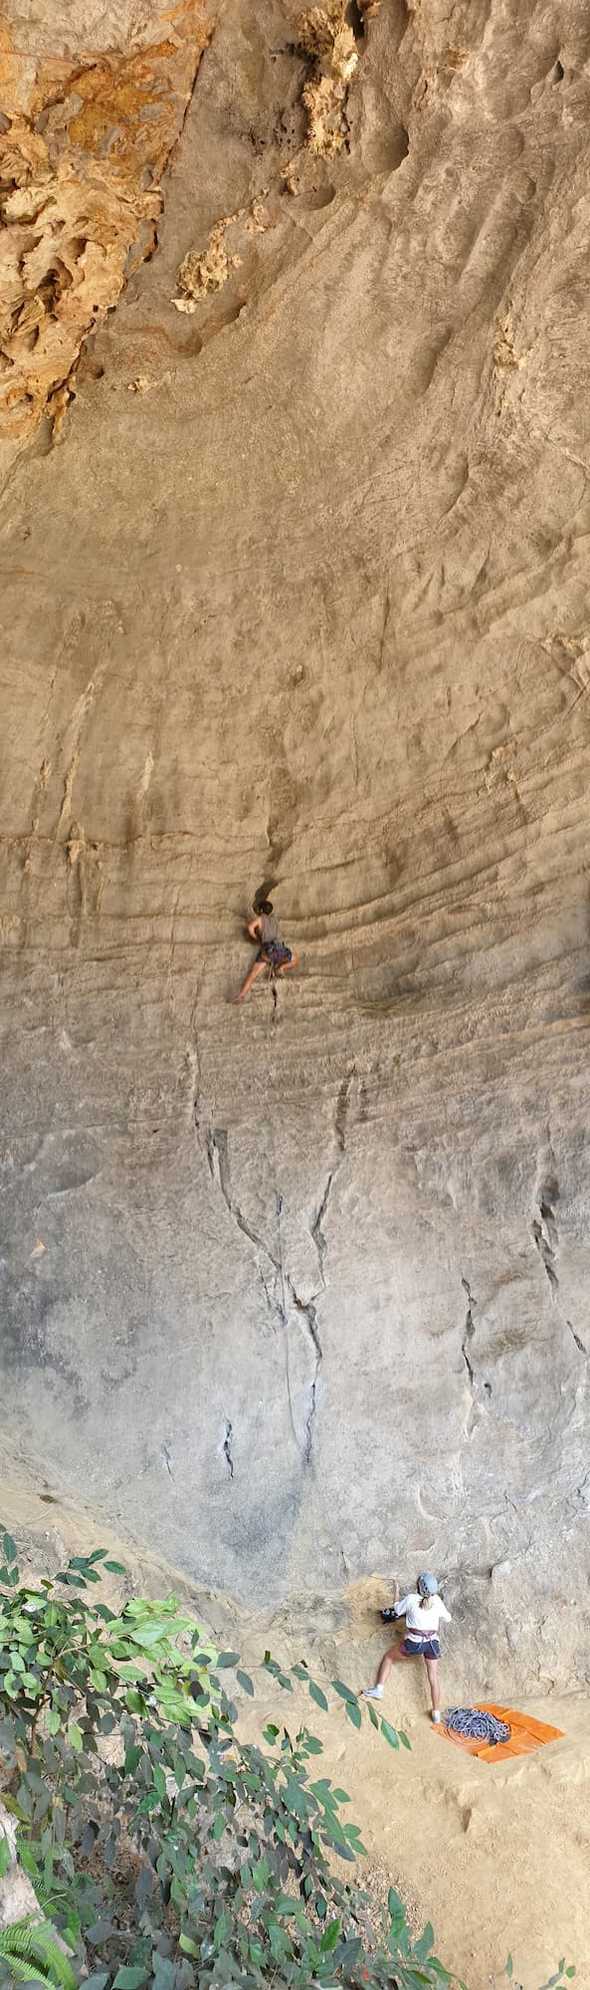 climbing in the cave at ganniang